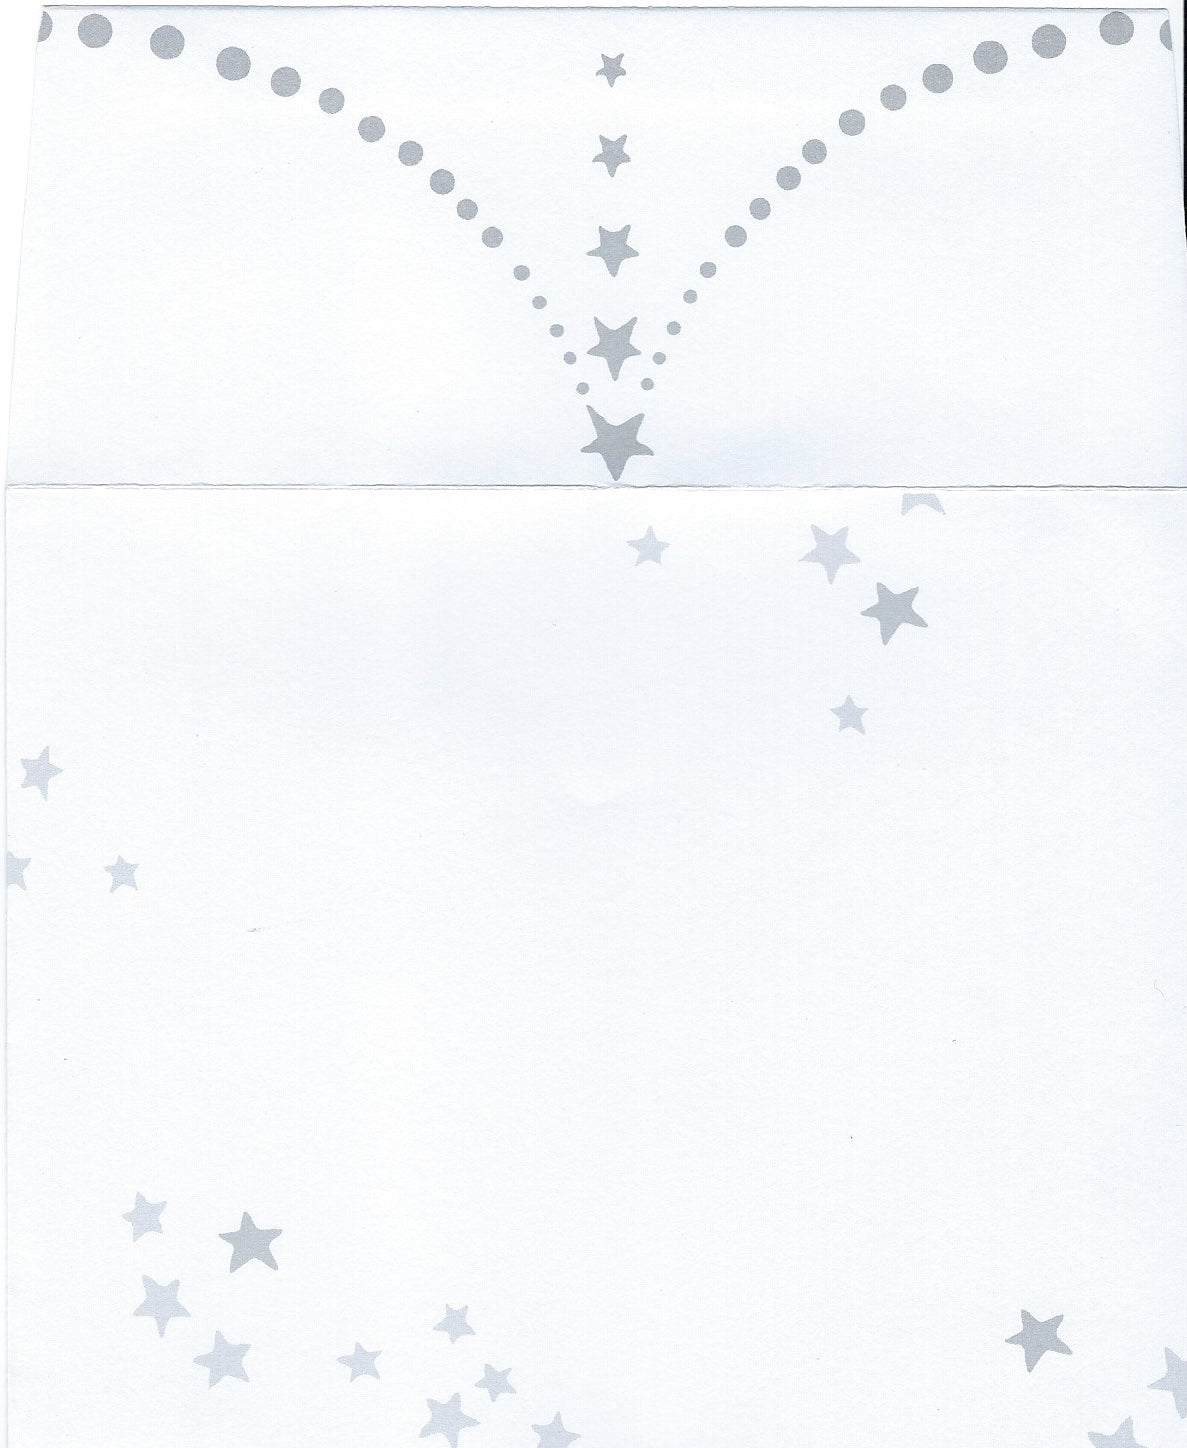 Scan of a white decorative envelope with a pattern consisting of gray dots and stars arranged in arched lines and scattered randomly across the page by Greeting Cards' Birthday Greeting Card - A Happy Birthday.